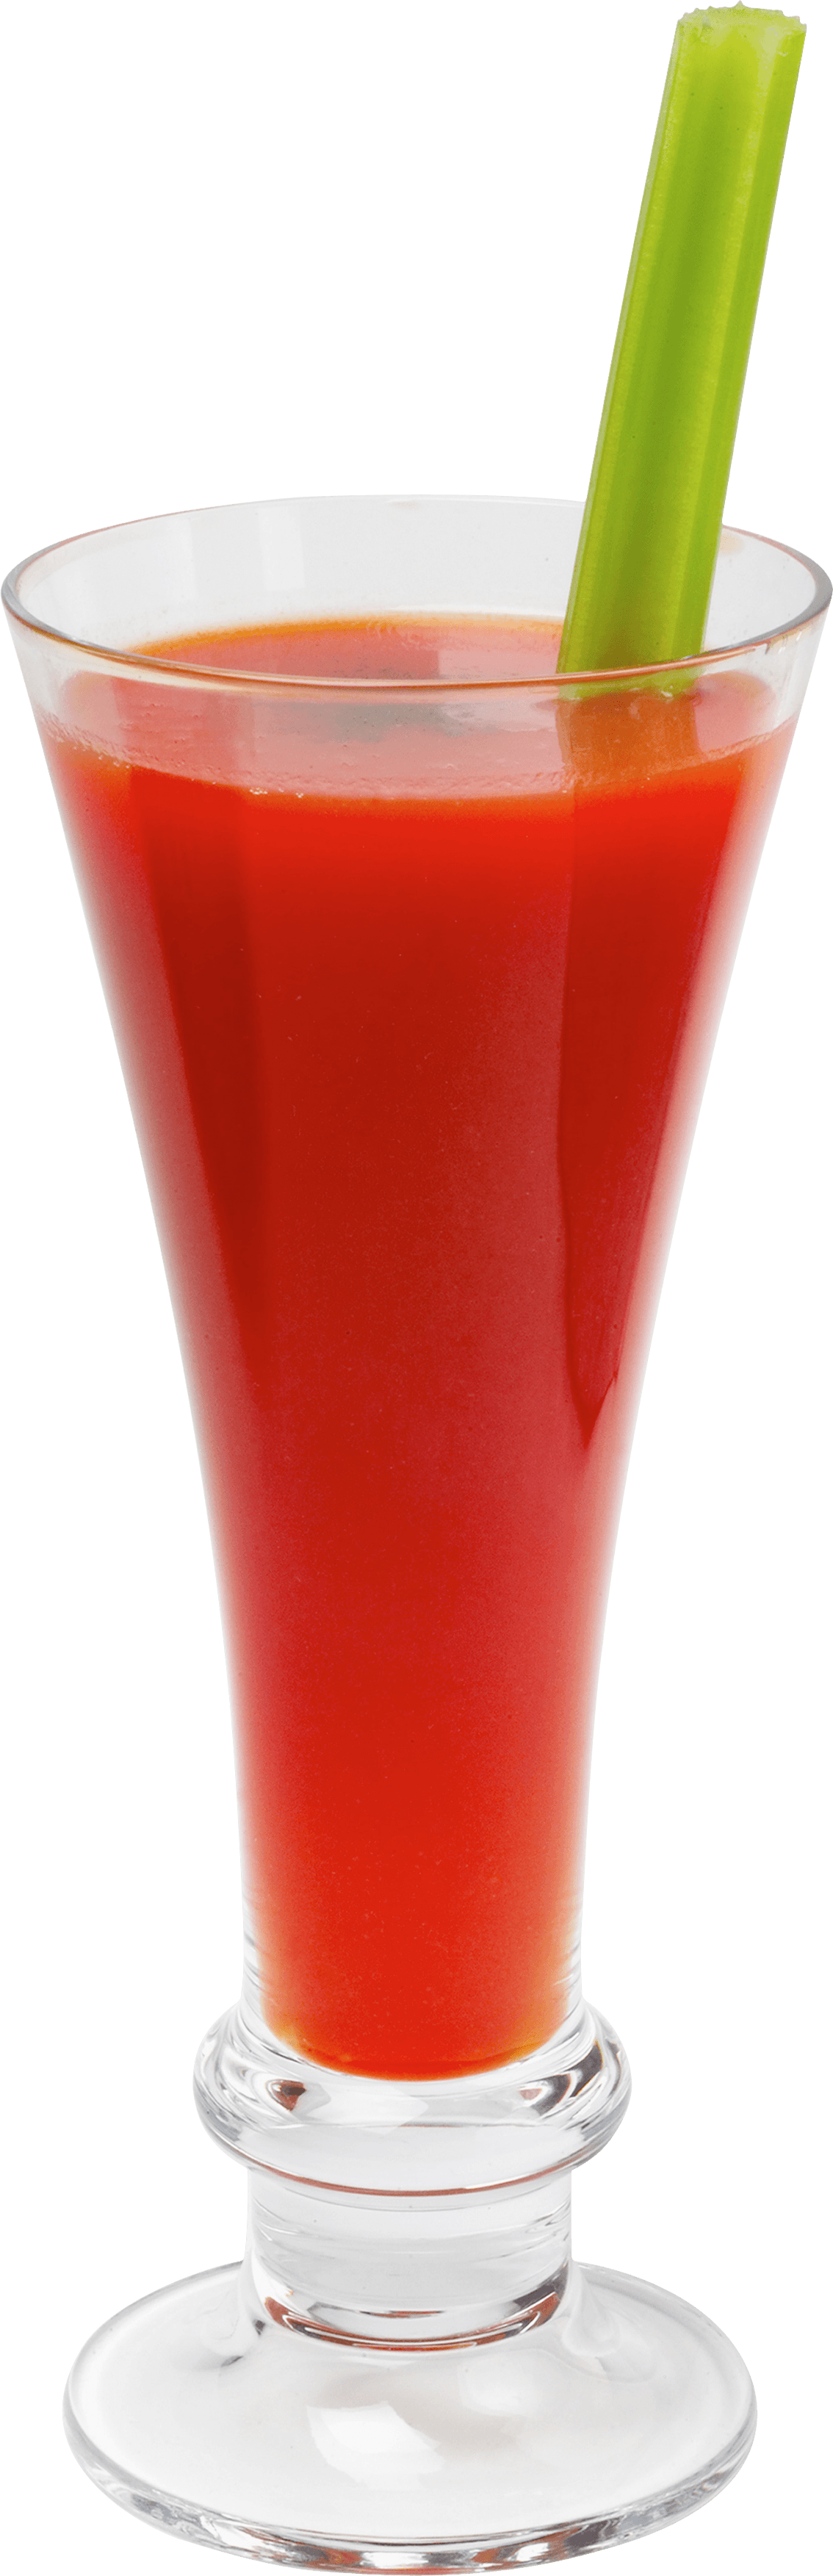 Tomato Juice Png Image PNG Image